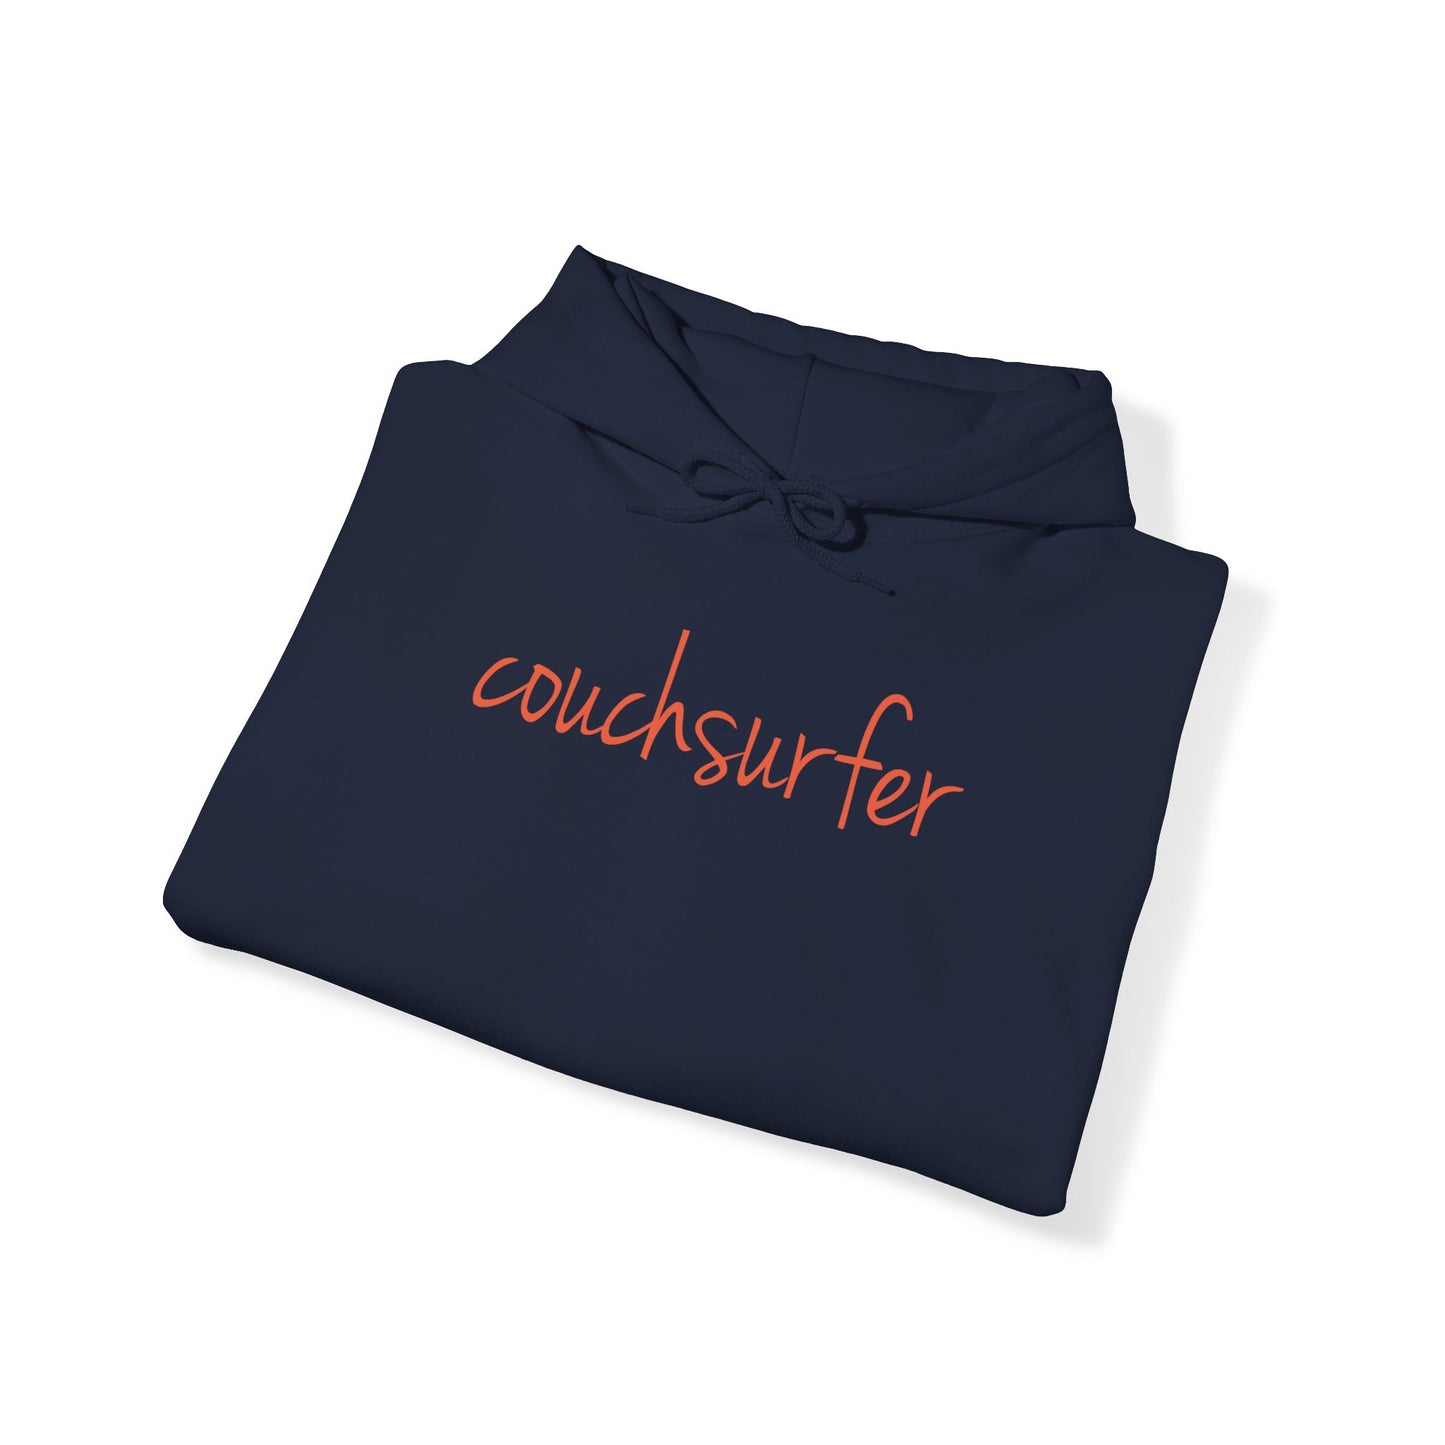 The Couchsurfer Hoodie